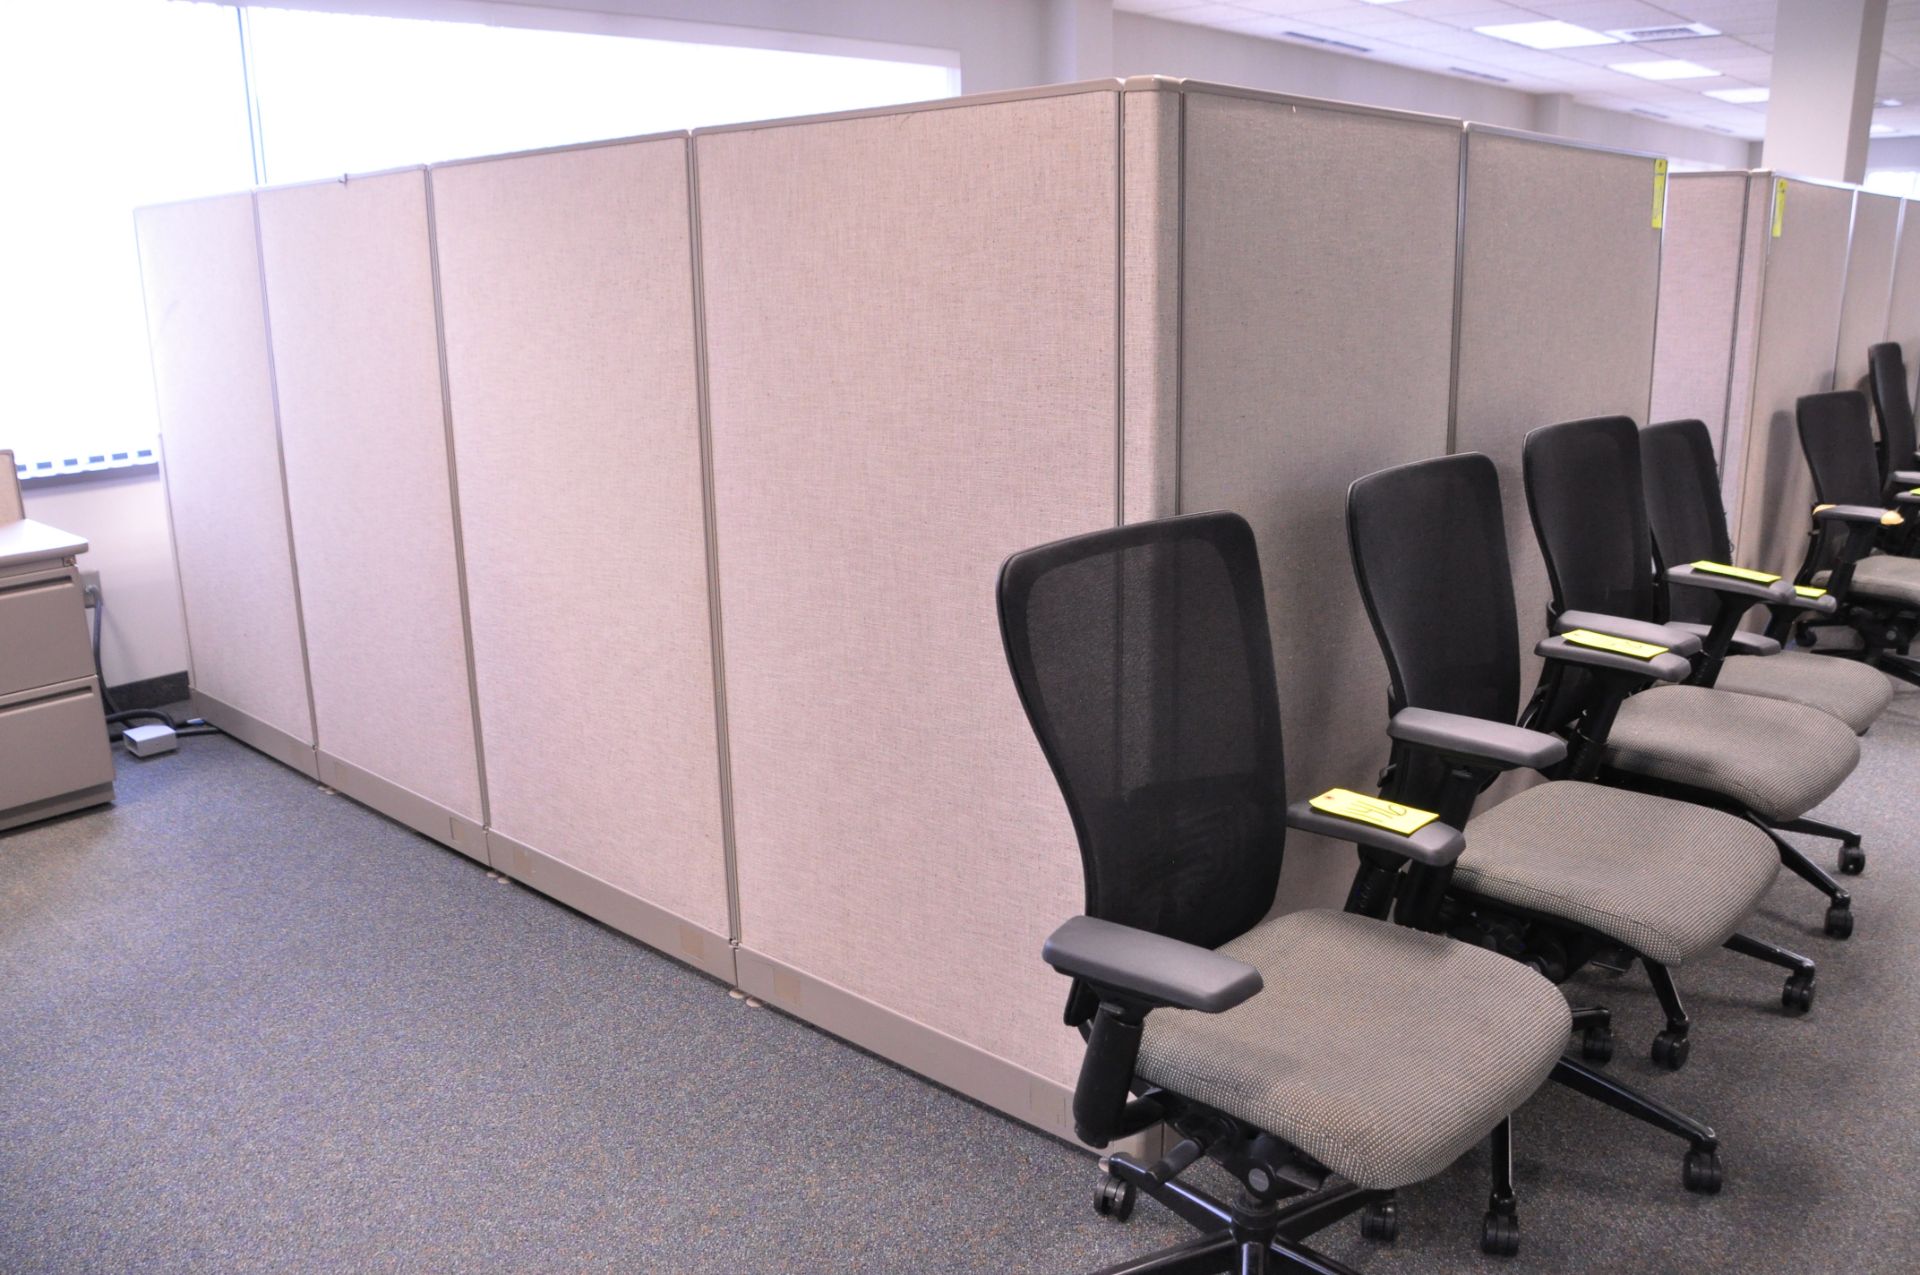 Lot-(1) 3-Station Cubicle Partition Work System with Overhead Cabinets, (No Chairs), (Located 2nd - Image 2 of 5